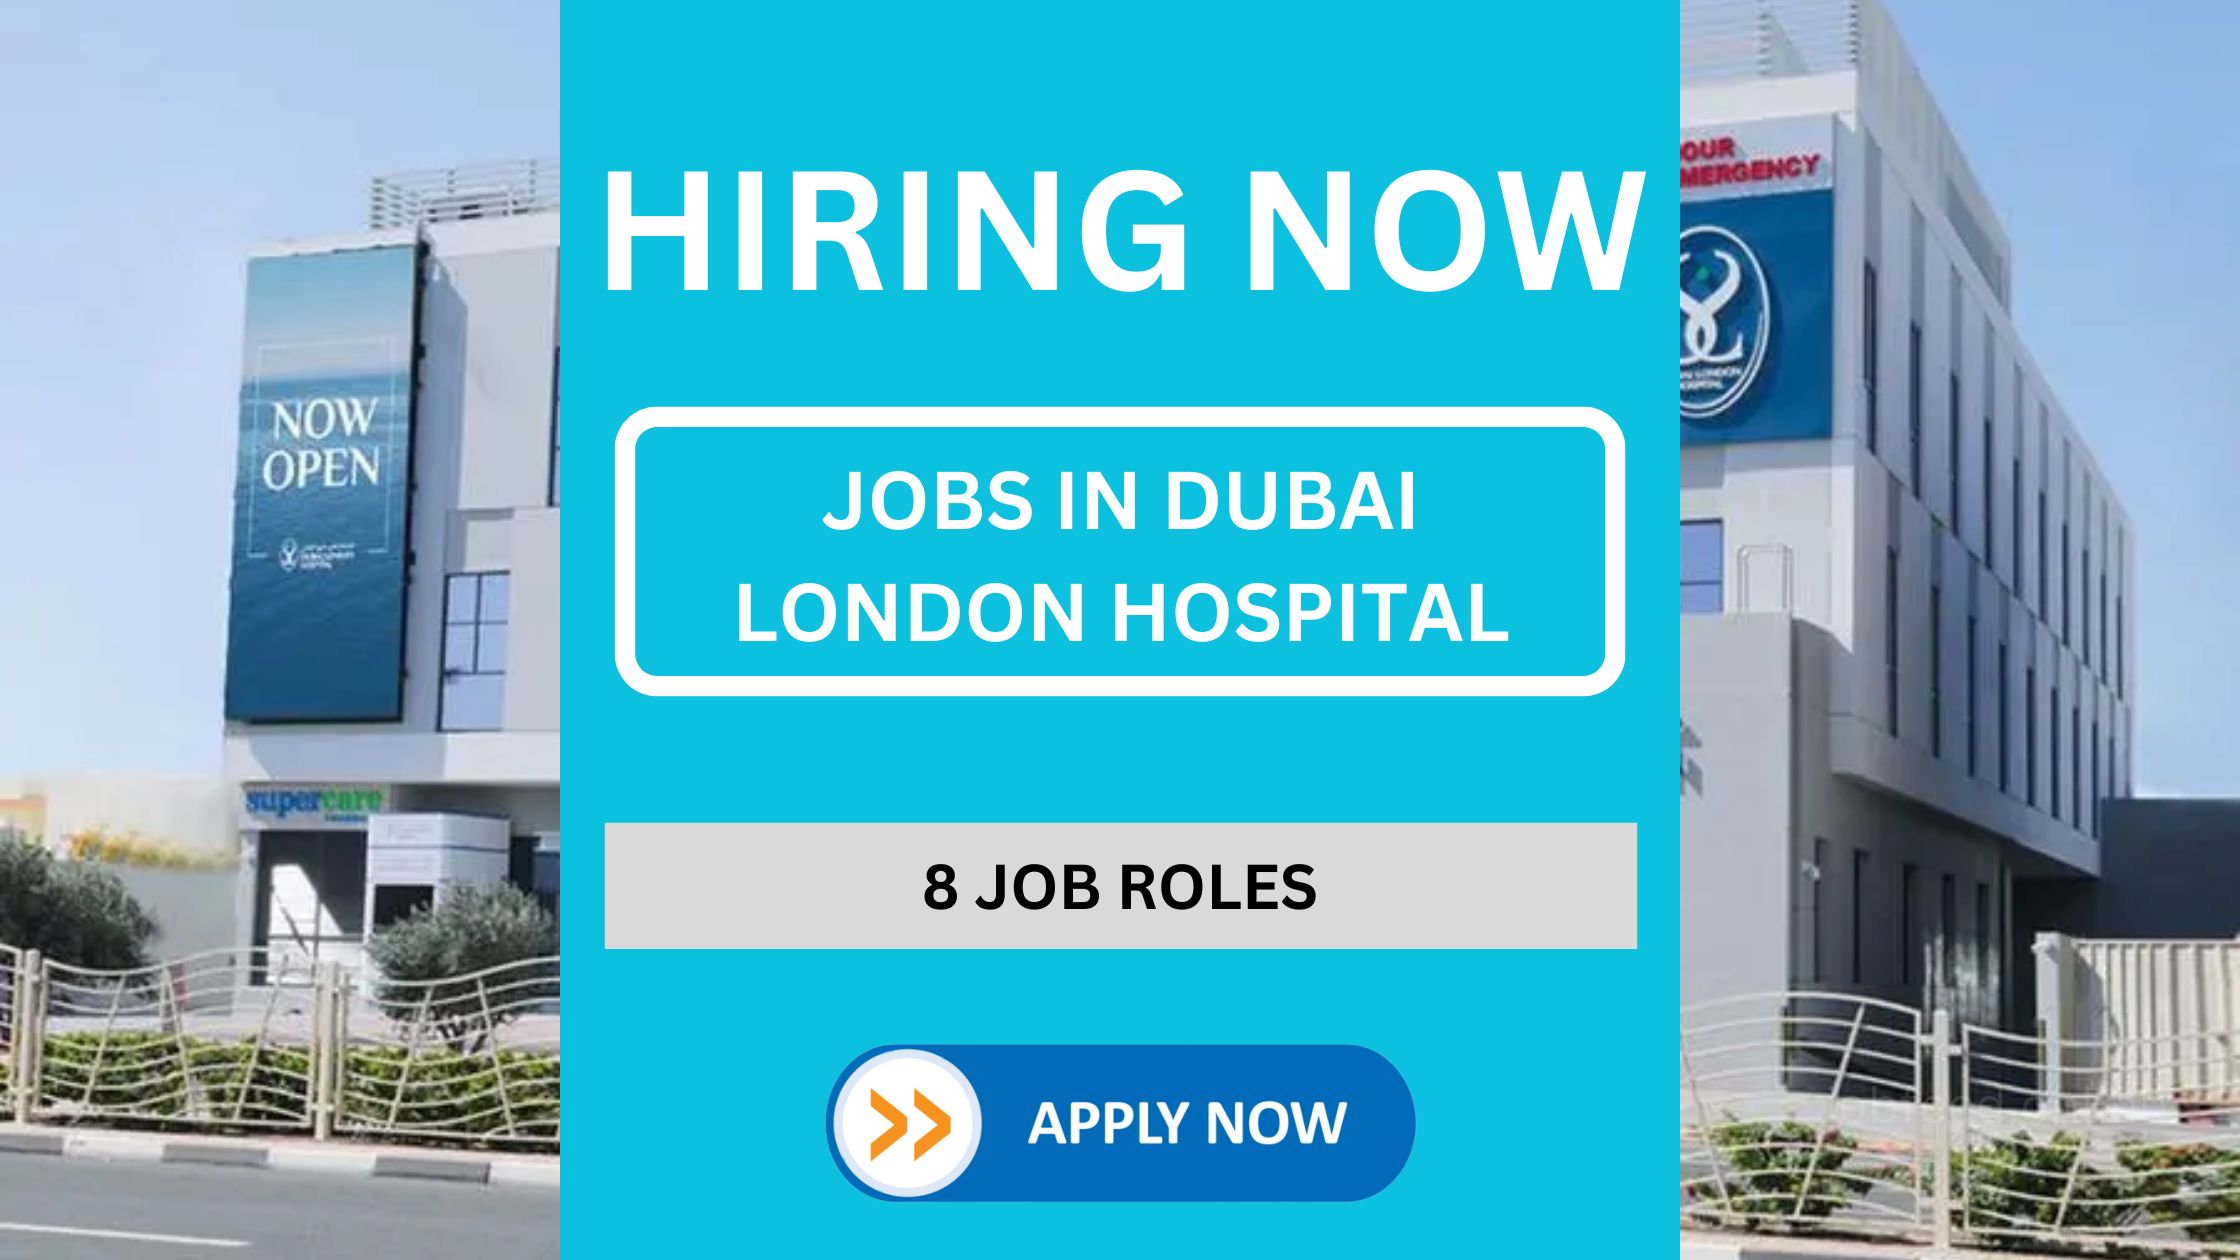 Job Opportunities in Dubai London Hospital, UAE: Exciting Roles in Healthcare